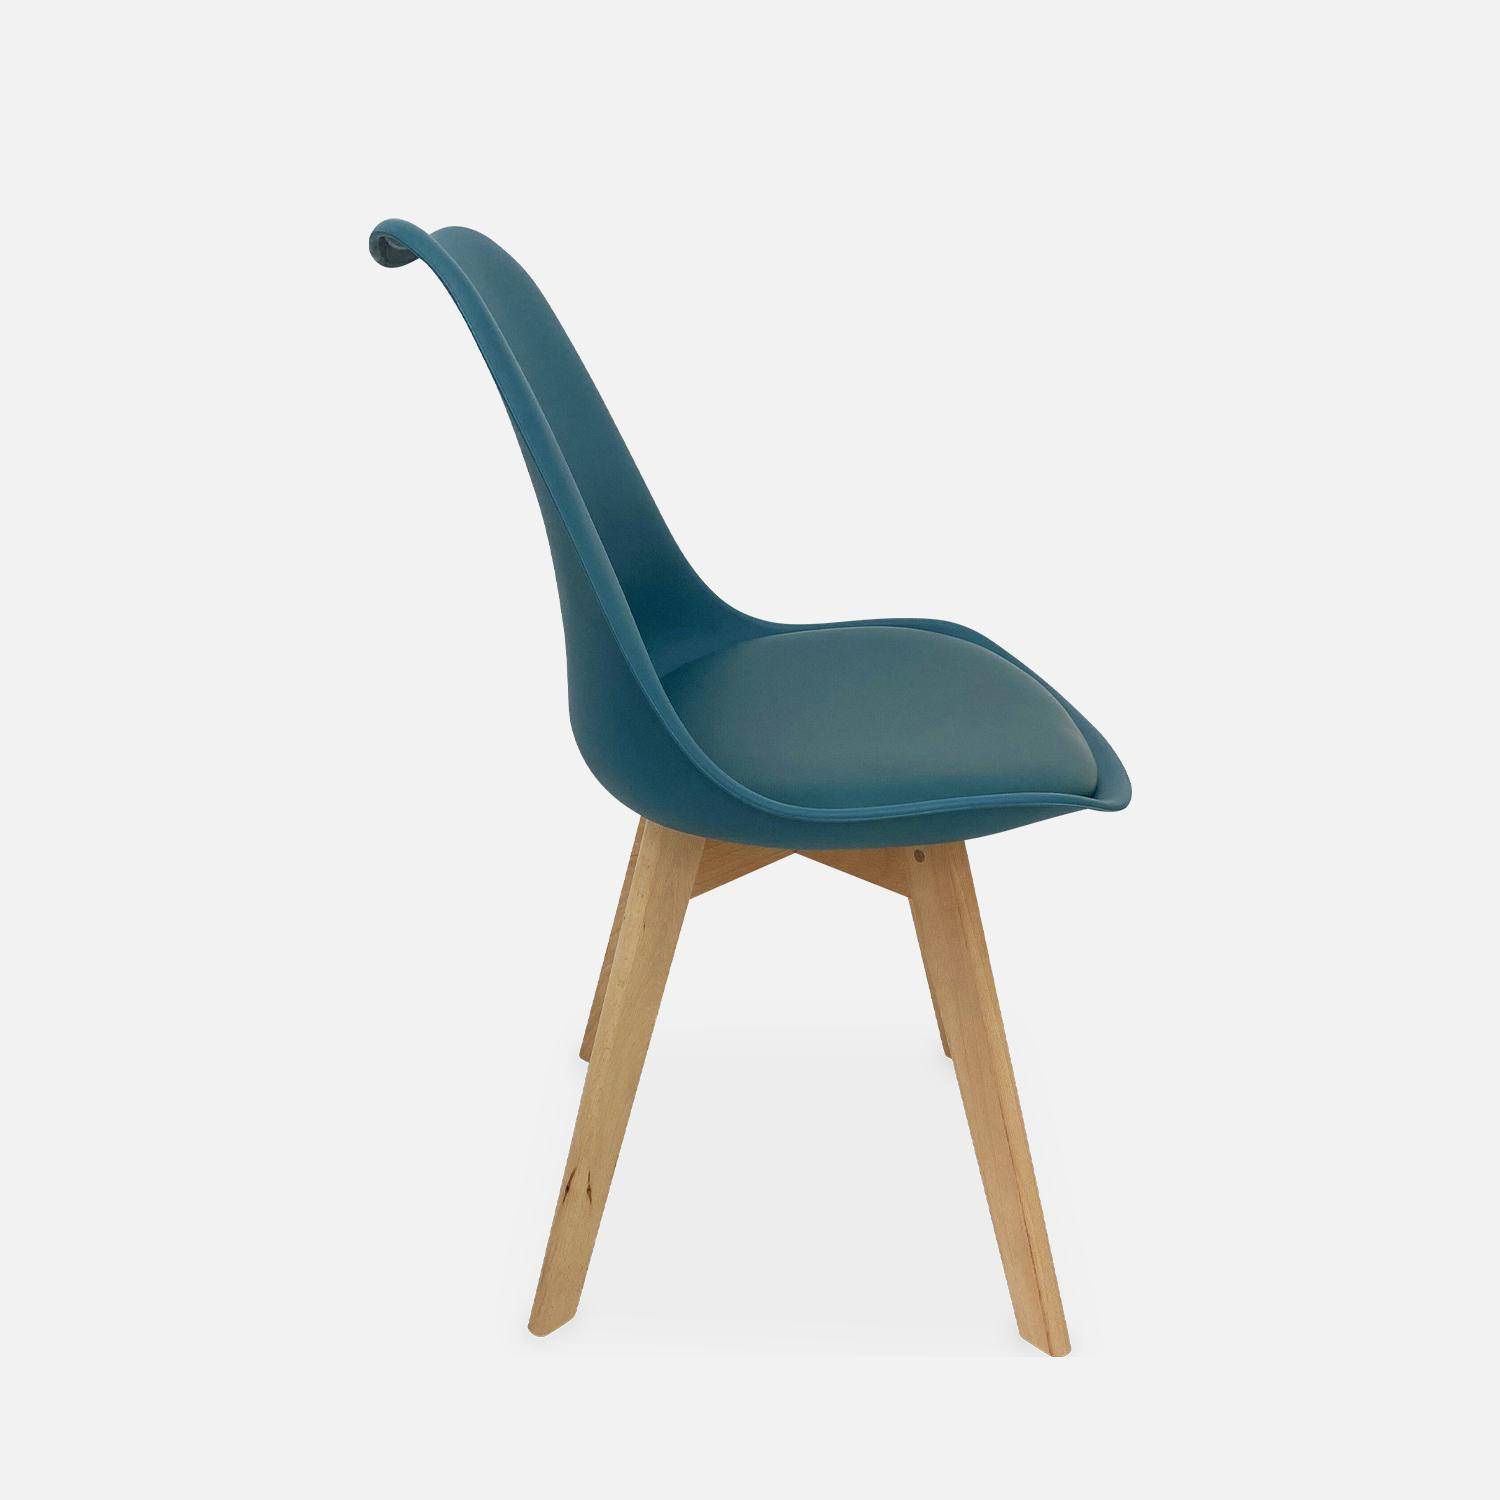 Pair of scandi-style faux-leather dining chair, blue, L49 x D55 x H81cm, NILS,sweeek,Photo3